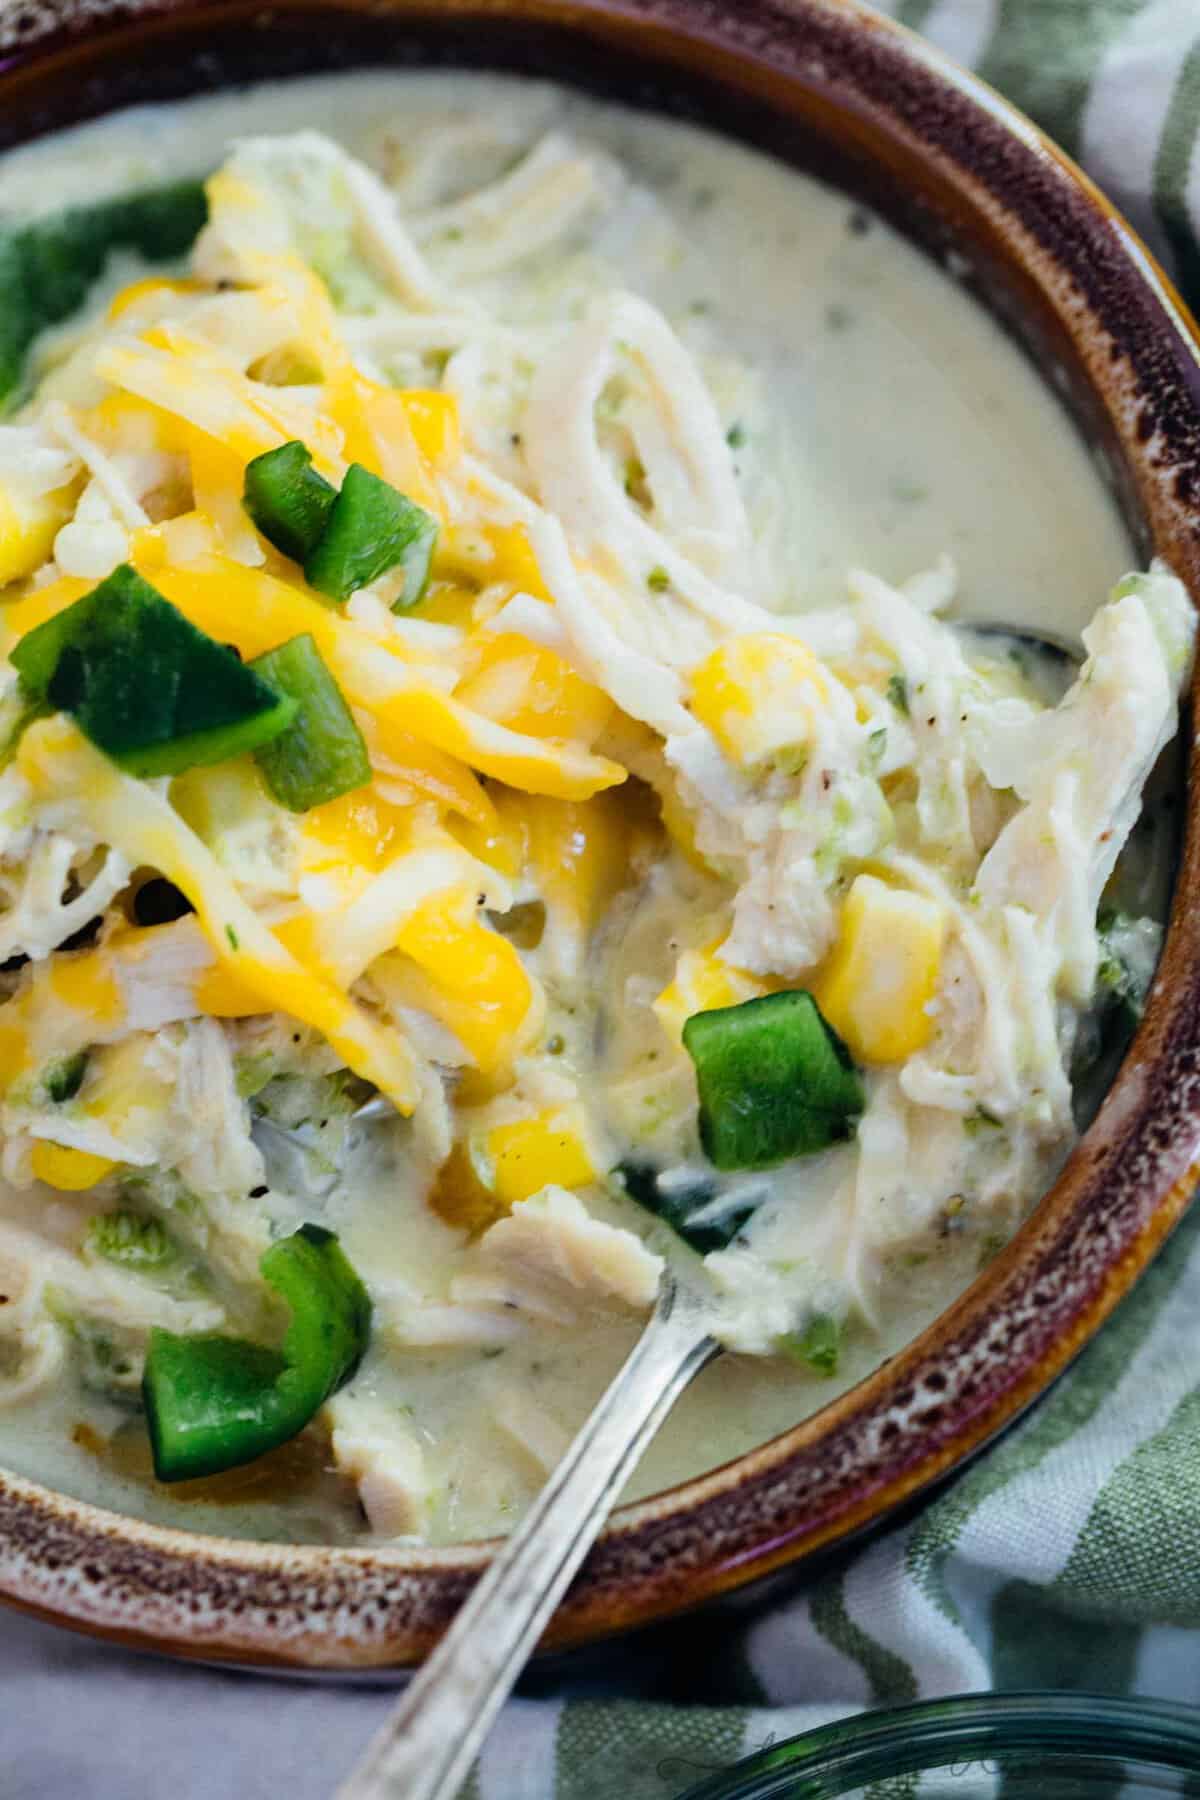 This creamy poblano pepper and chicken soup has all your favorite components in a delicious soup! A subtle hint of spiciness along with the smokey charred poblanos and the creaminess of the soup rounds it all out. I promise this will be a new favorite!